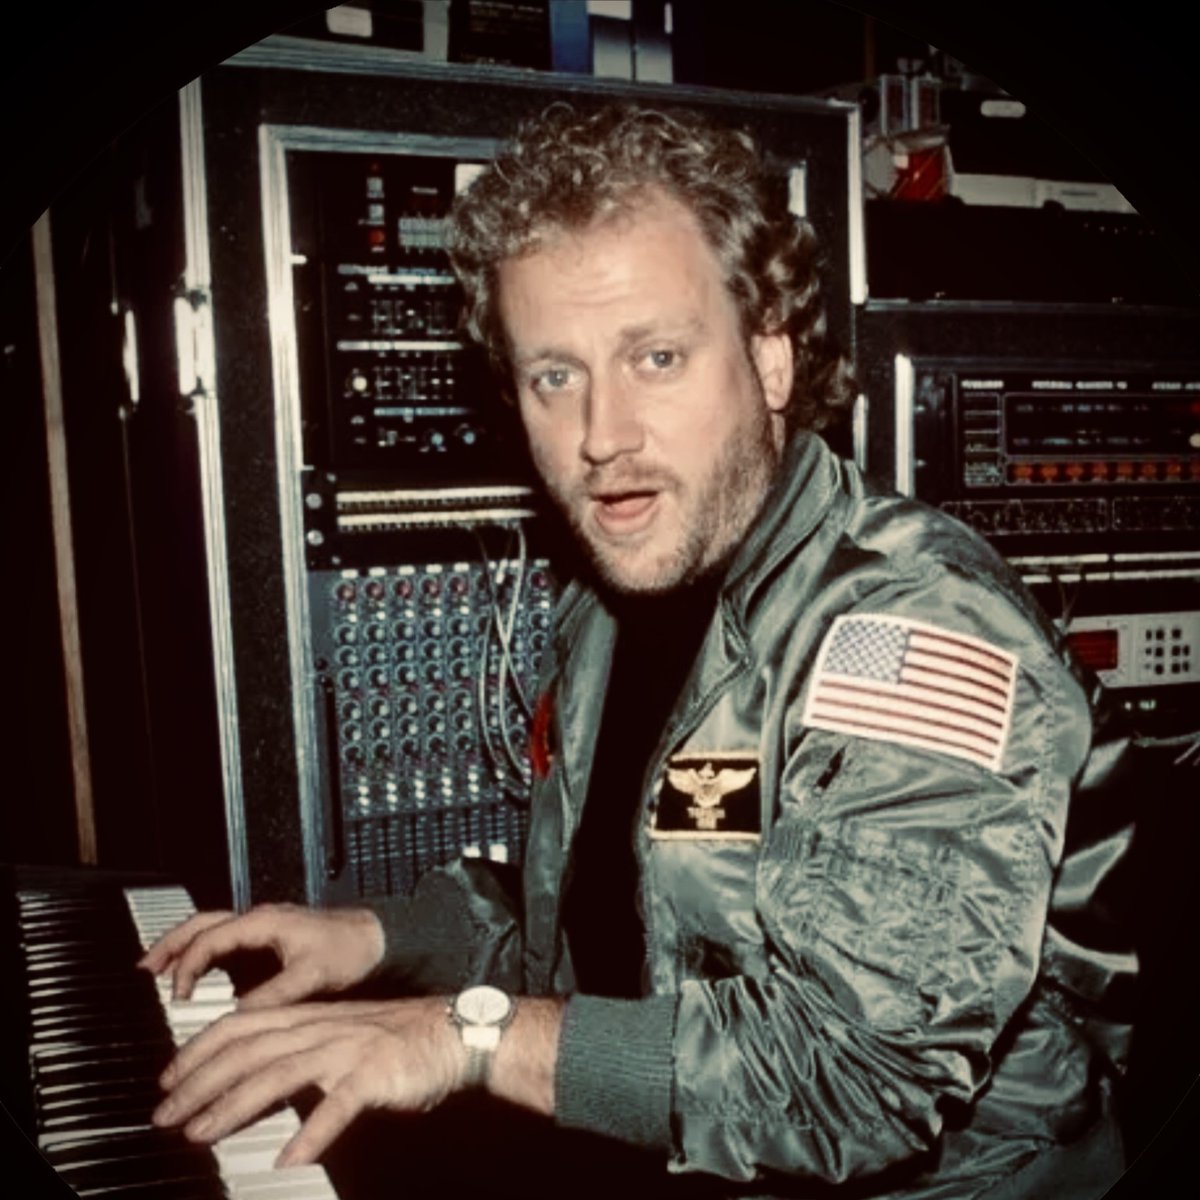 Recognise this synth artist? Ready for an instrumental cover? We share here a few pictures of German synth artist Harold Faltermeyer. Harold composed Axel F in 1984 for the film Beverly Hills Cop. Munatix is getting geared up 😎.